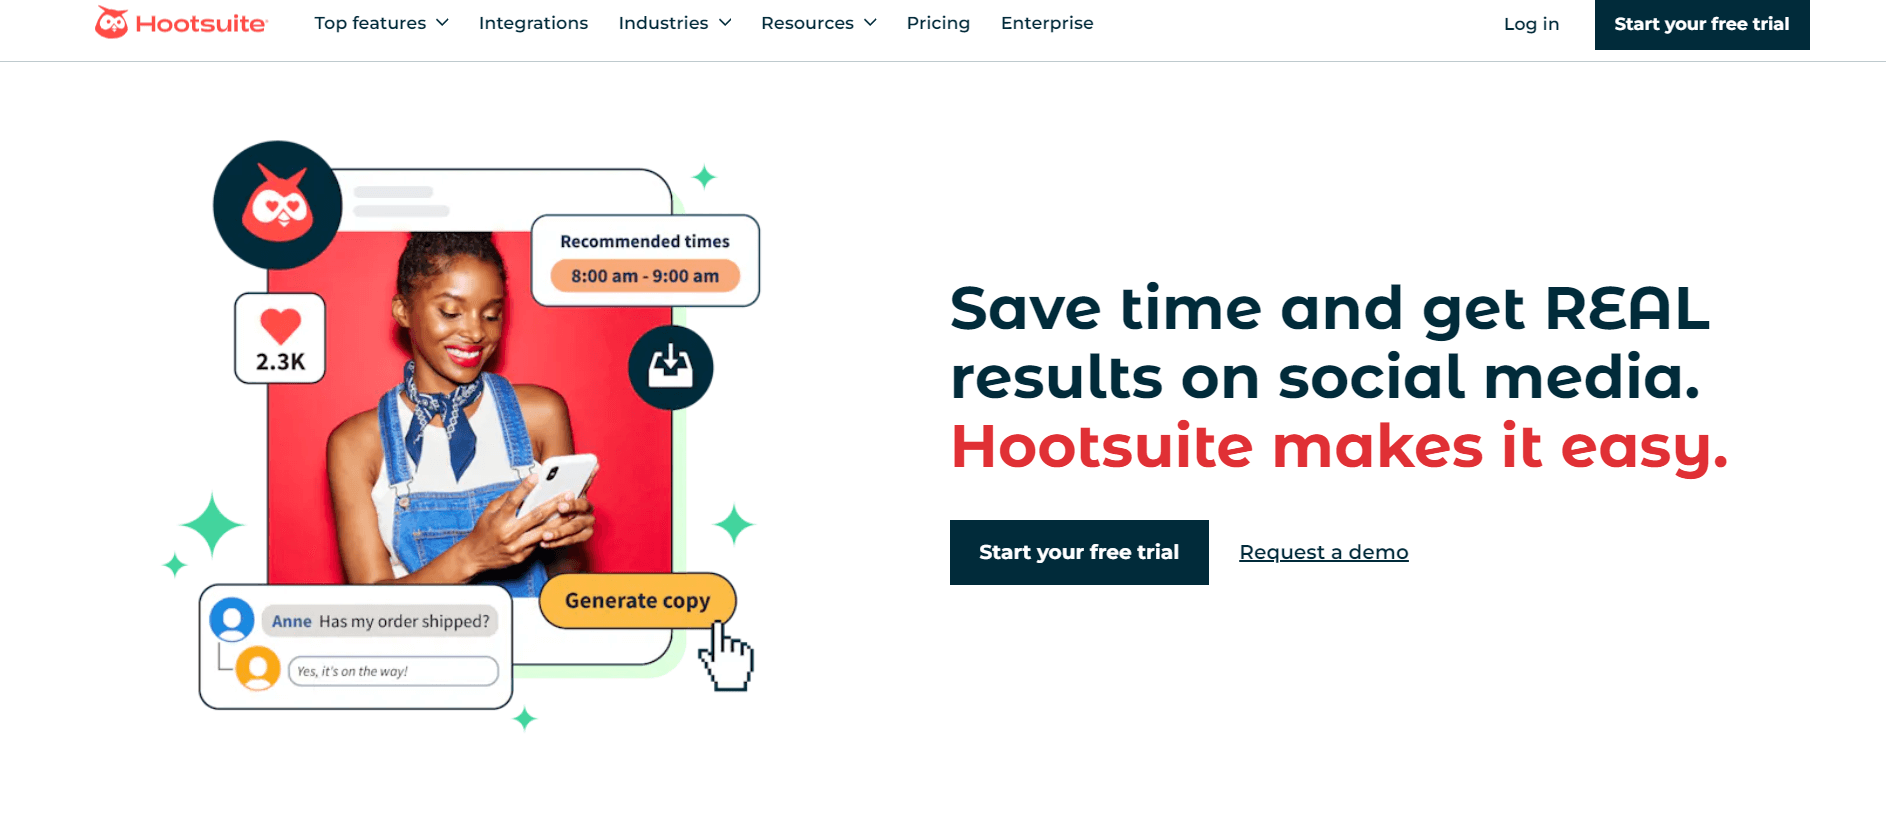 Hootsuite homepage promoting its social media management platform, featuring a woman using a phone and options to start a free trial or request a demo.